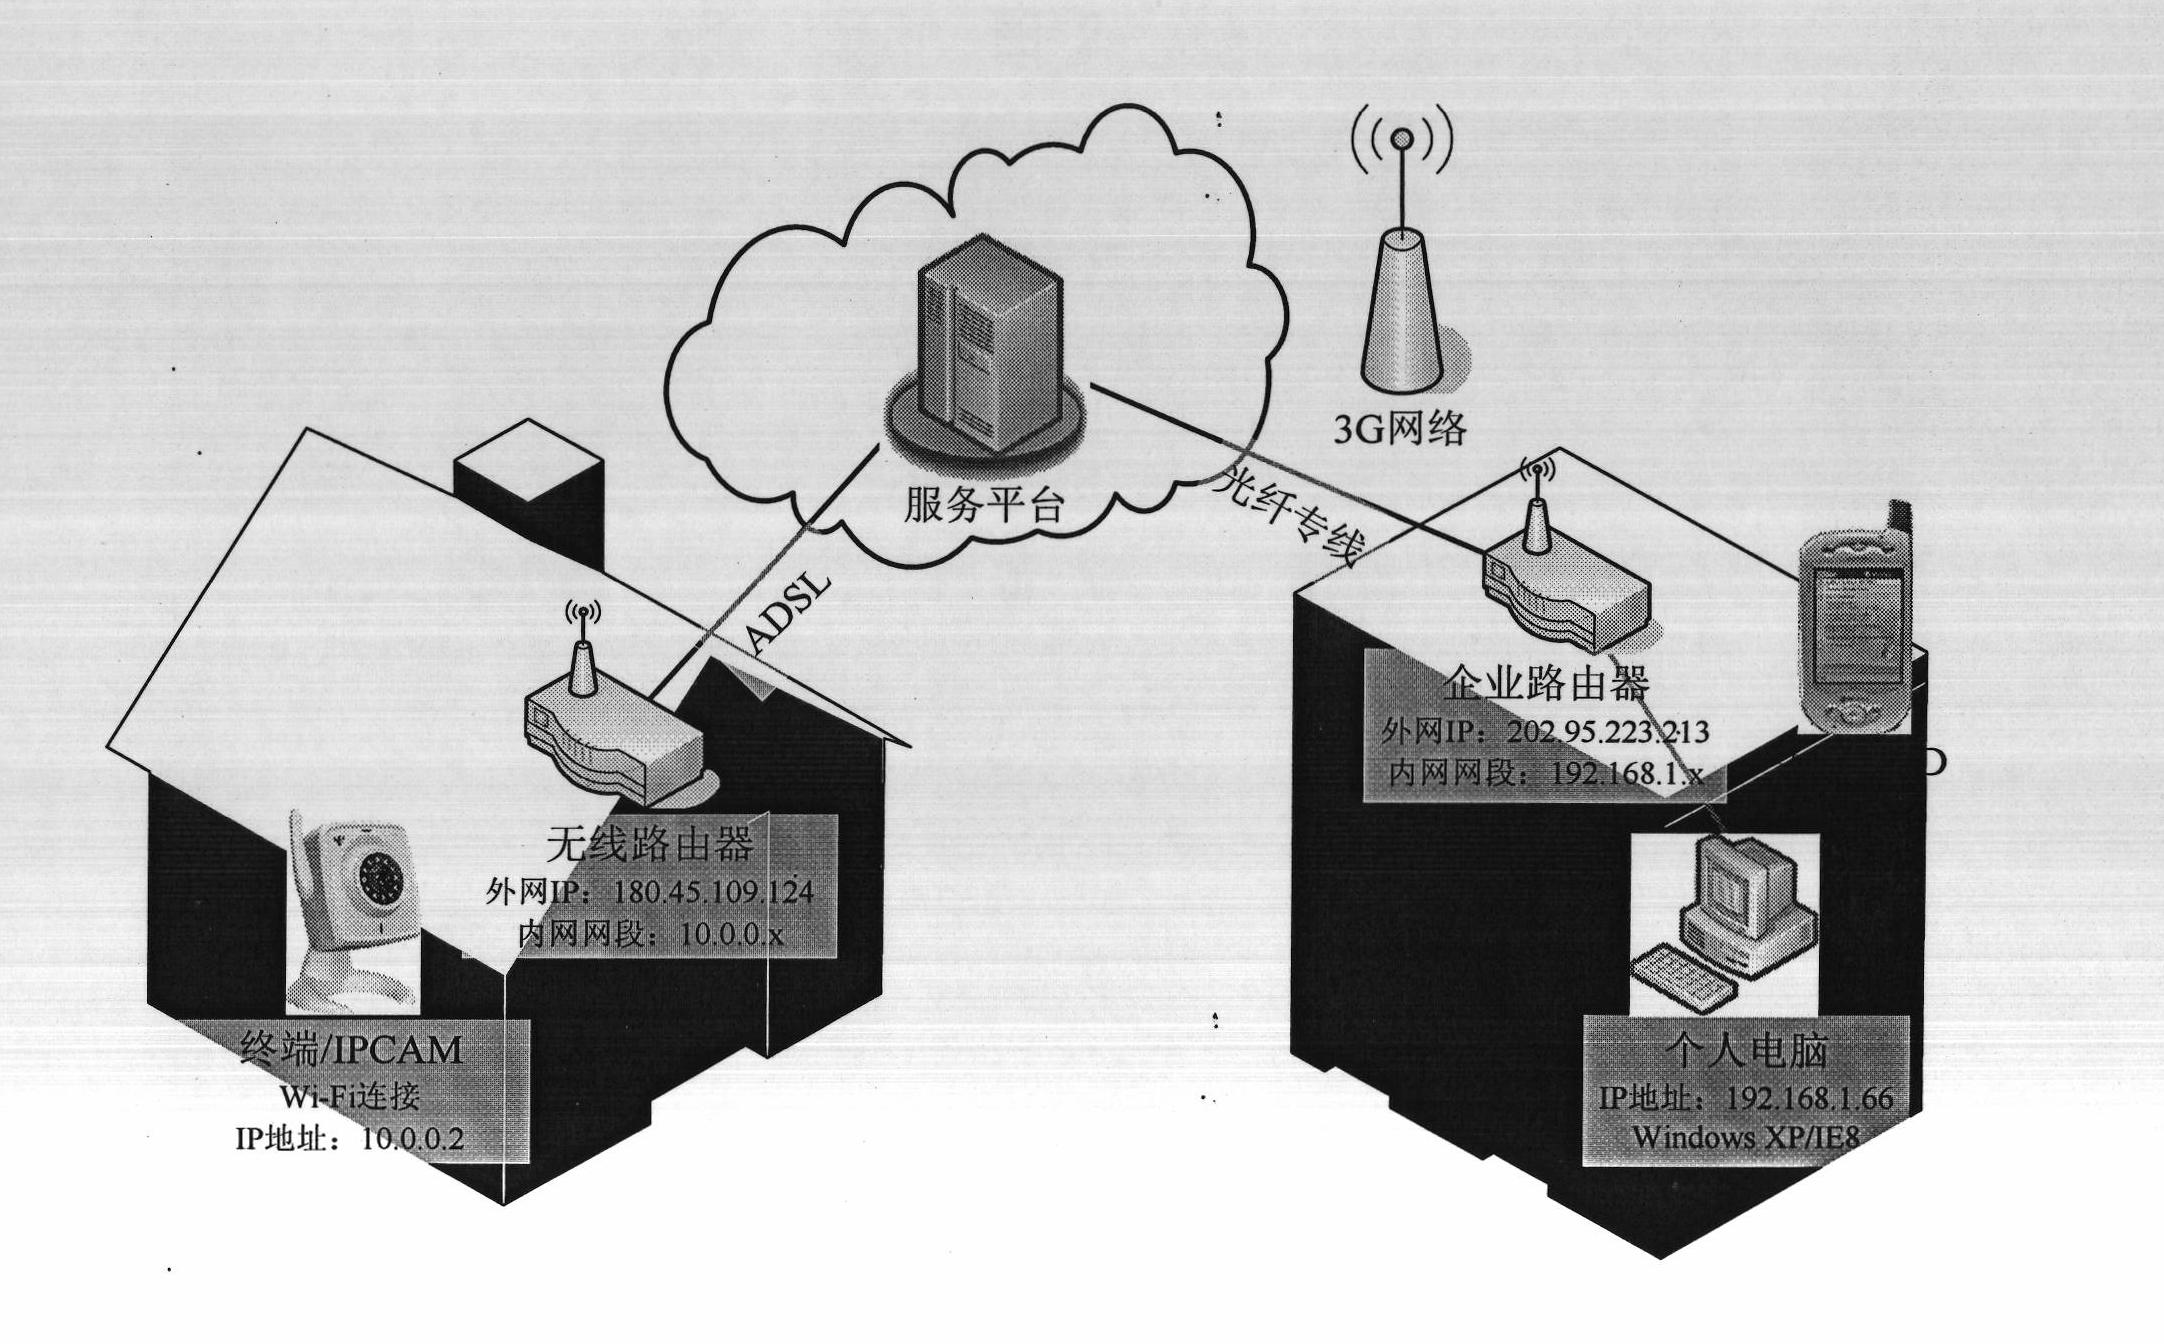 IP Camera service system of point-to-point protocol based on two-way safety authentication